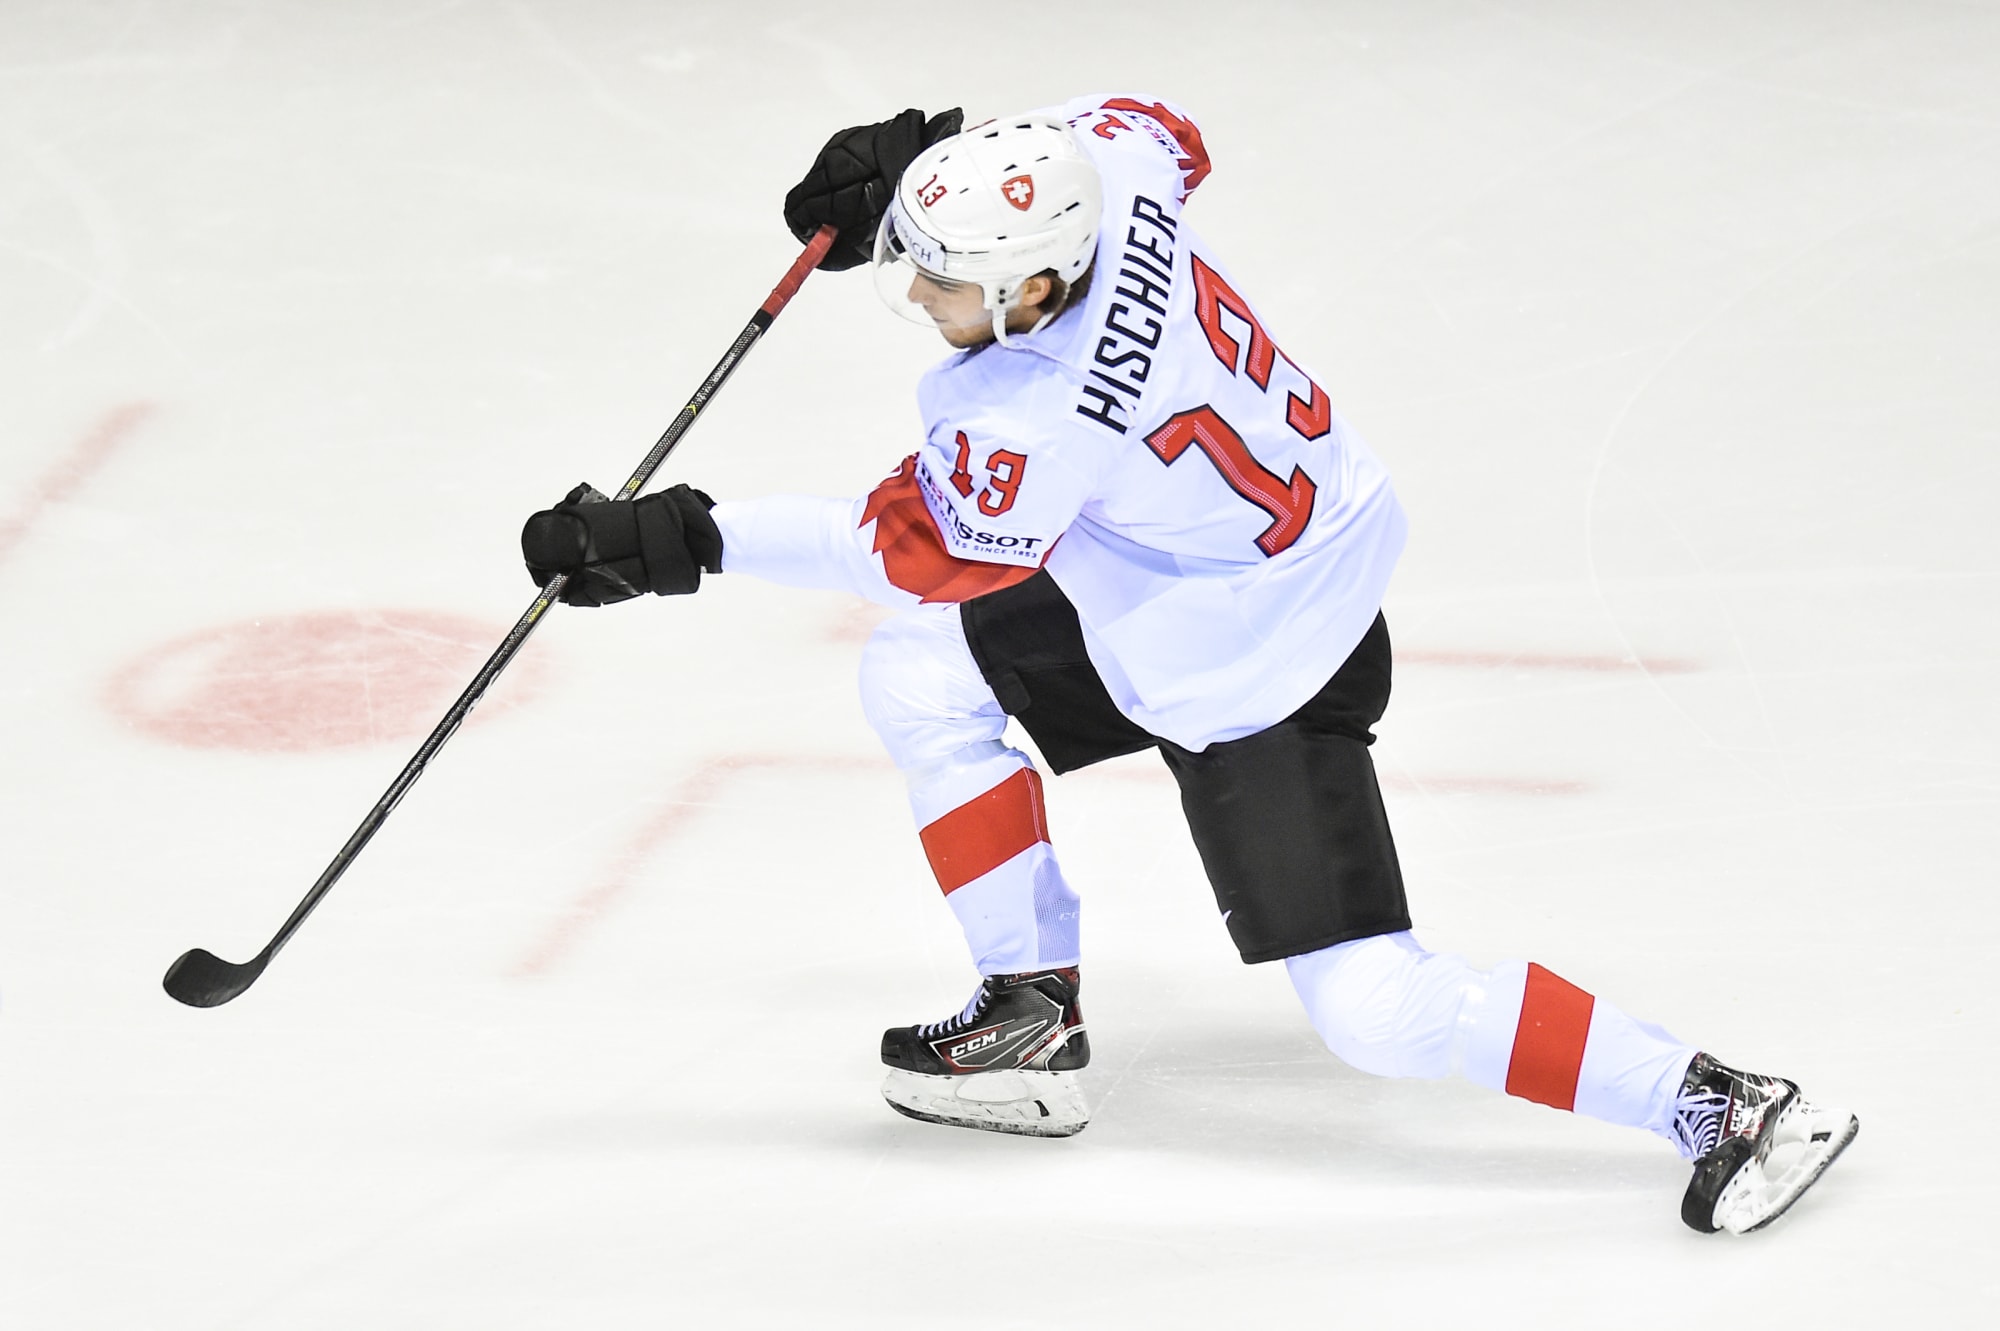 Devils' Hischier latest in line of skilled Swiss forwards, Taiwan News